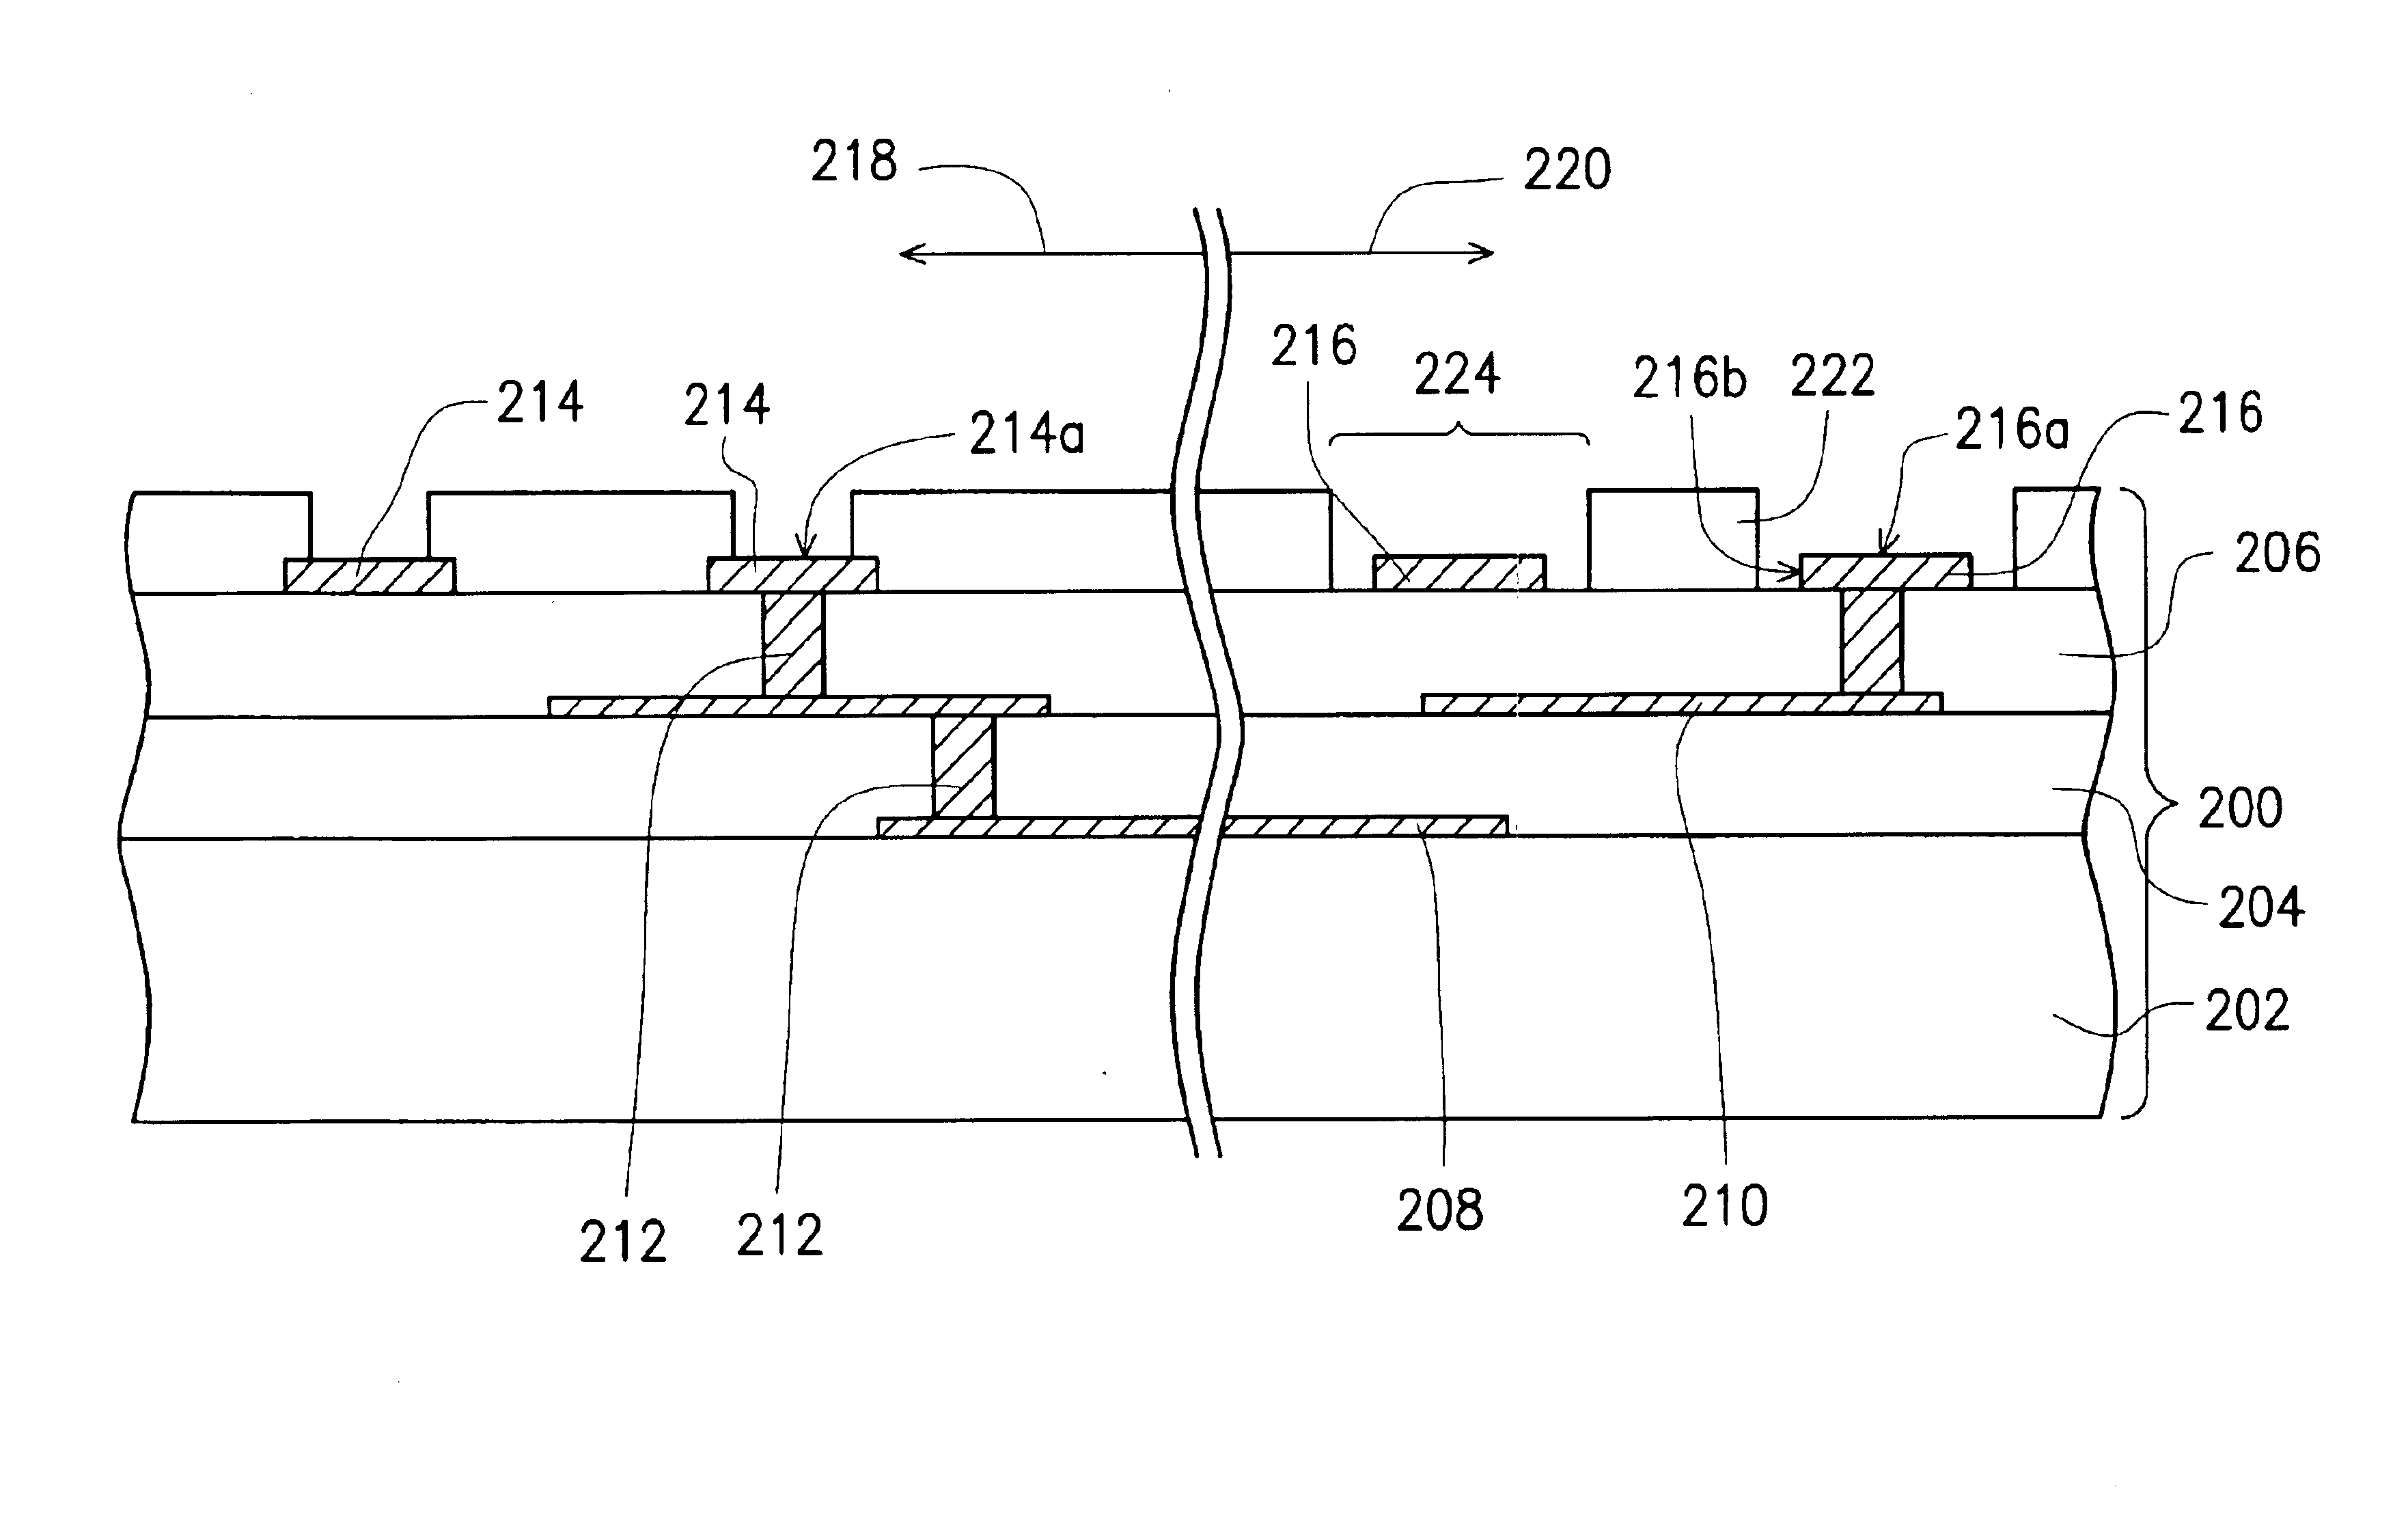 Substrate structure of flip chip package